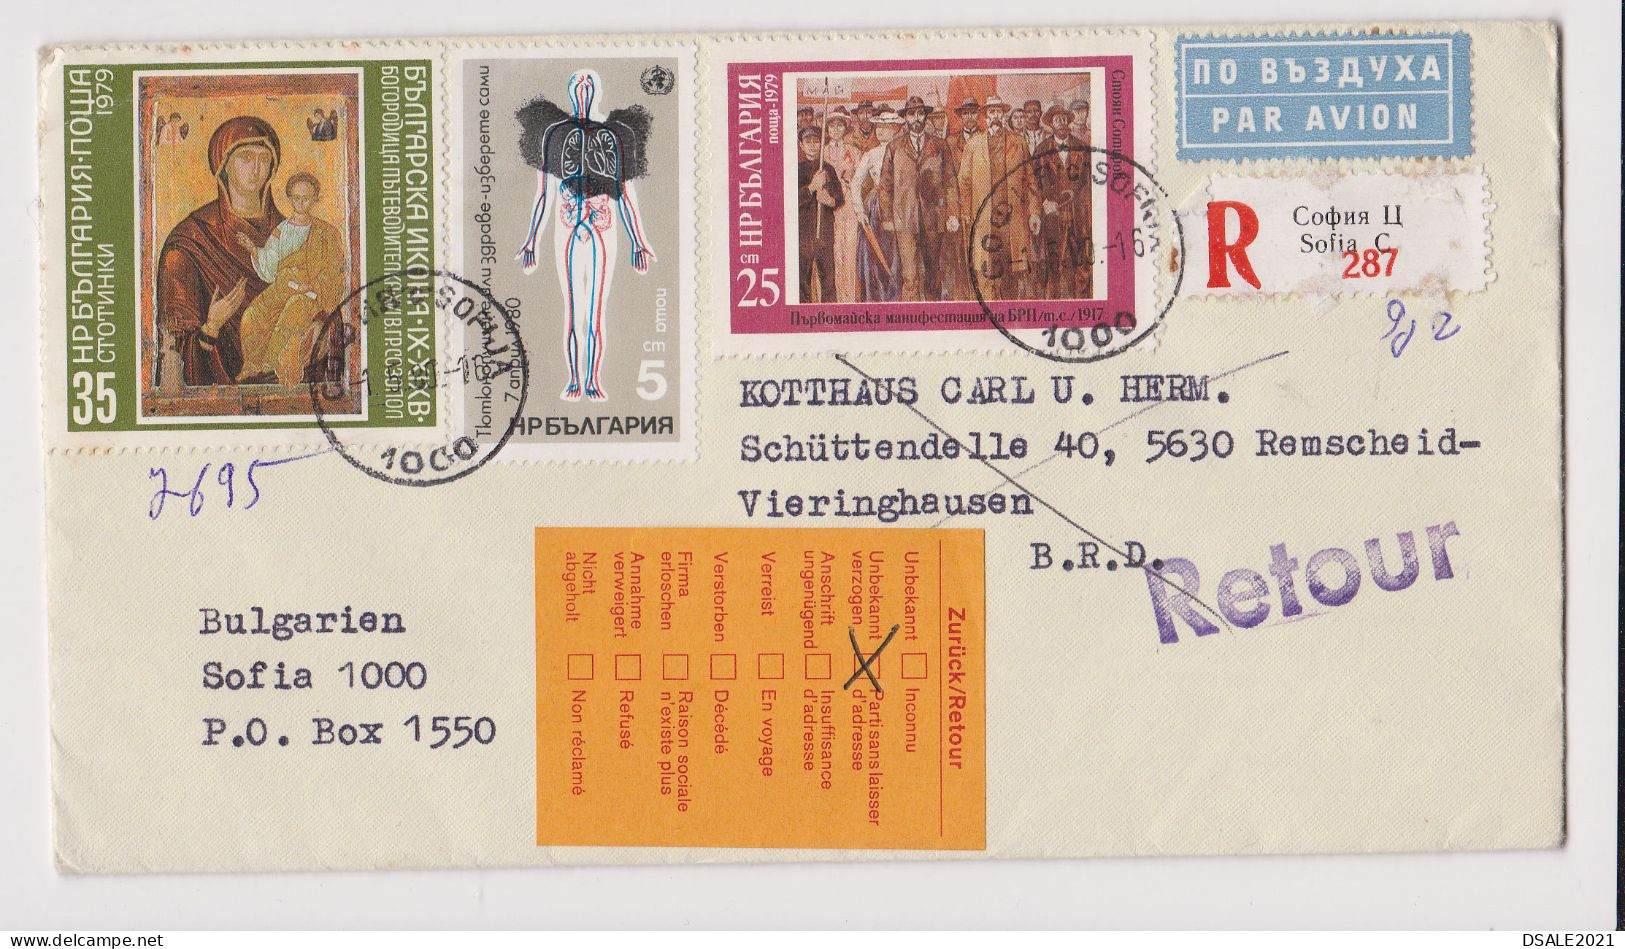 Bulgaria Bulgarien 1980 Registered Airmail Cover W/Colorful Topic Stamps Sent To Germany BRD, Return To Sender (66311) - Cartas & Documentos